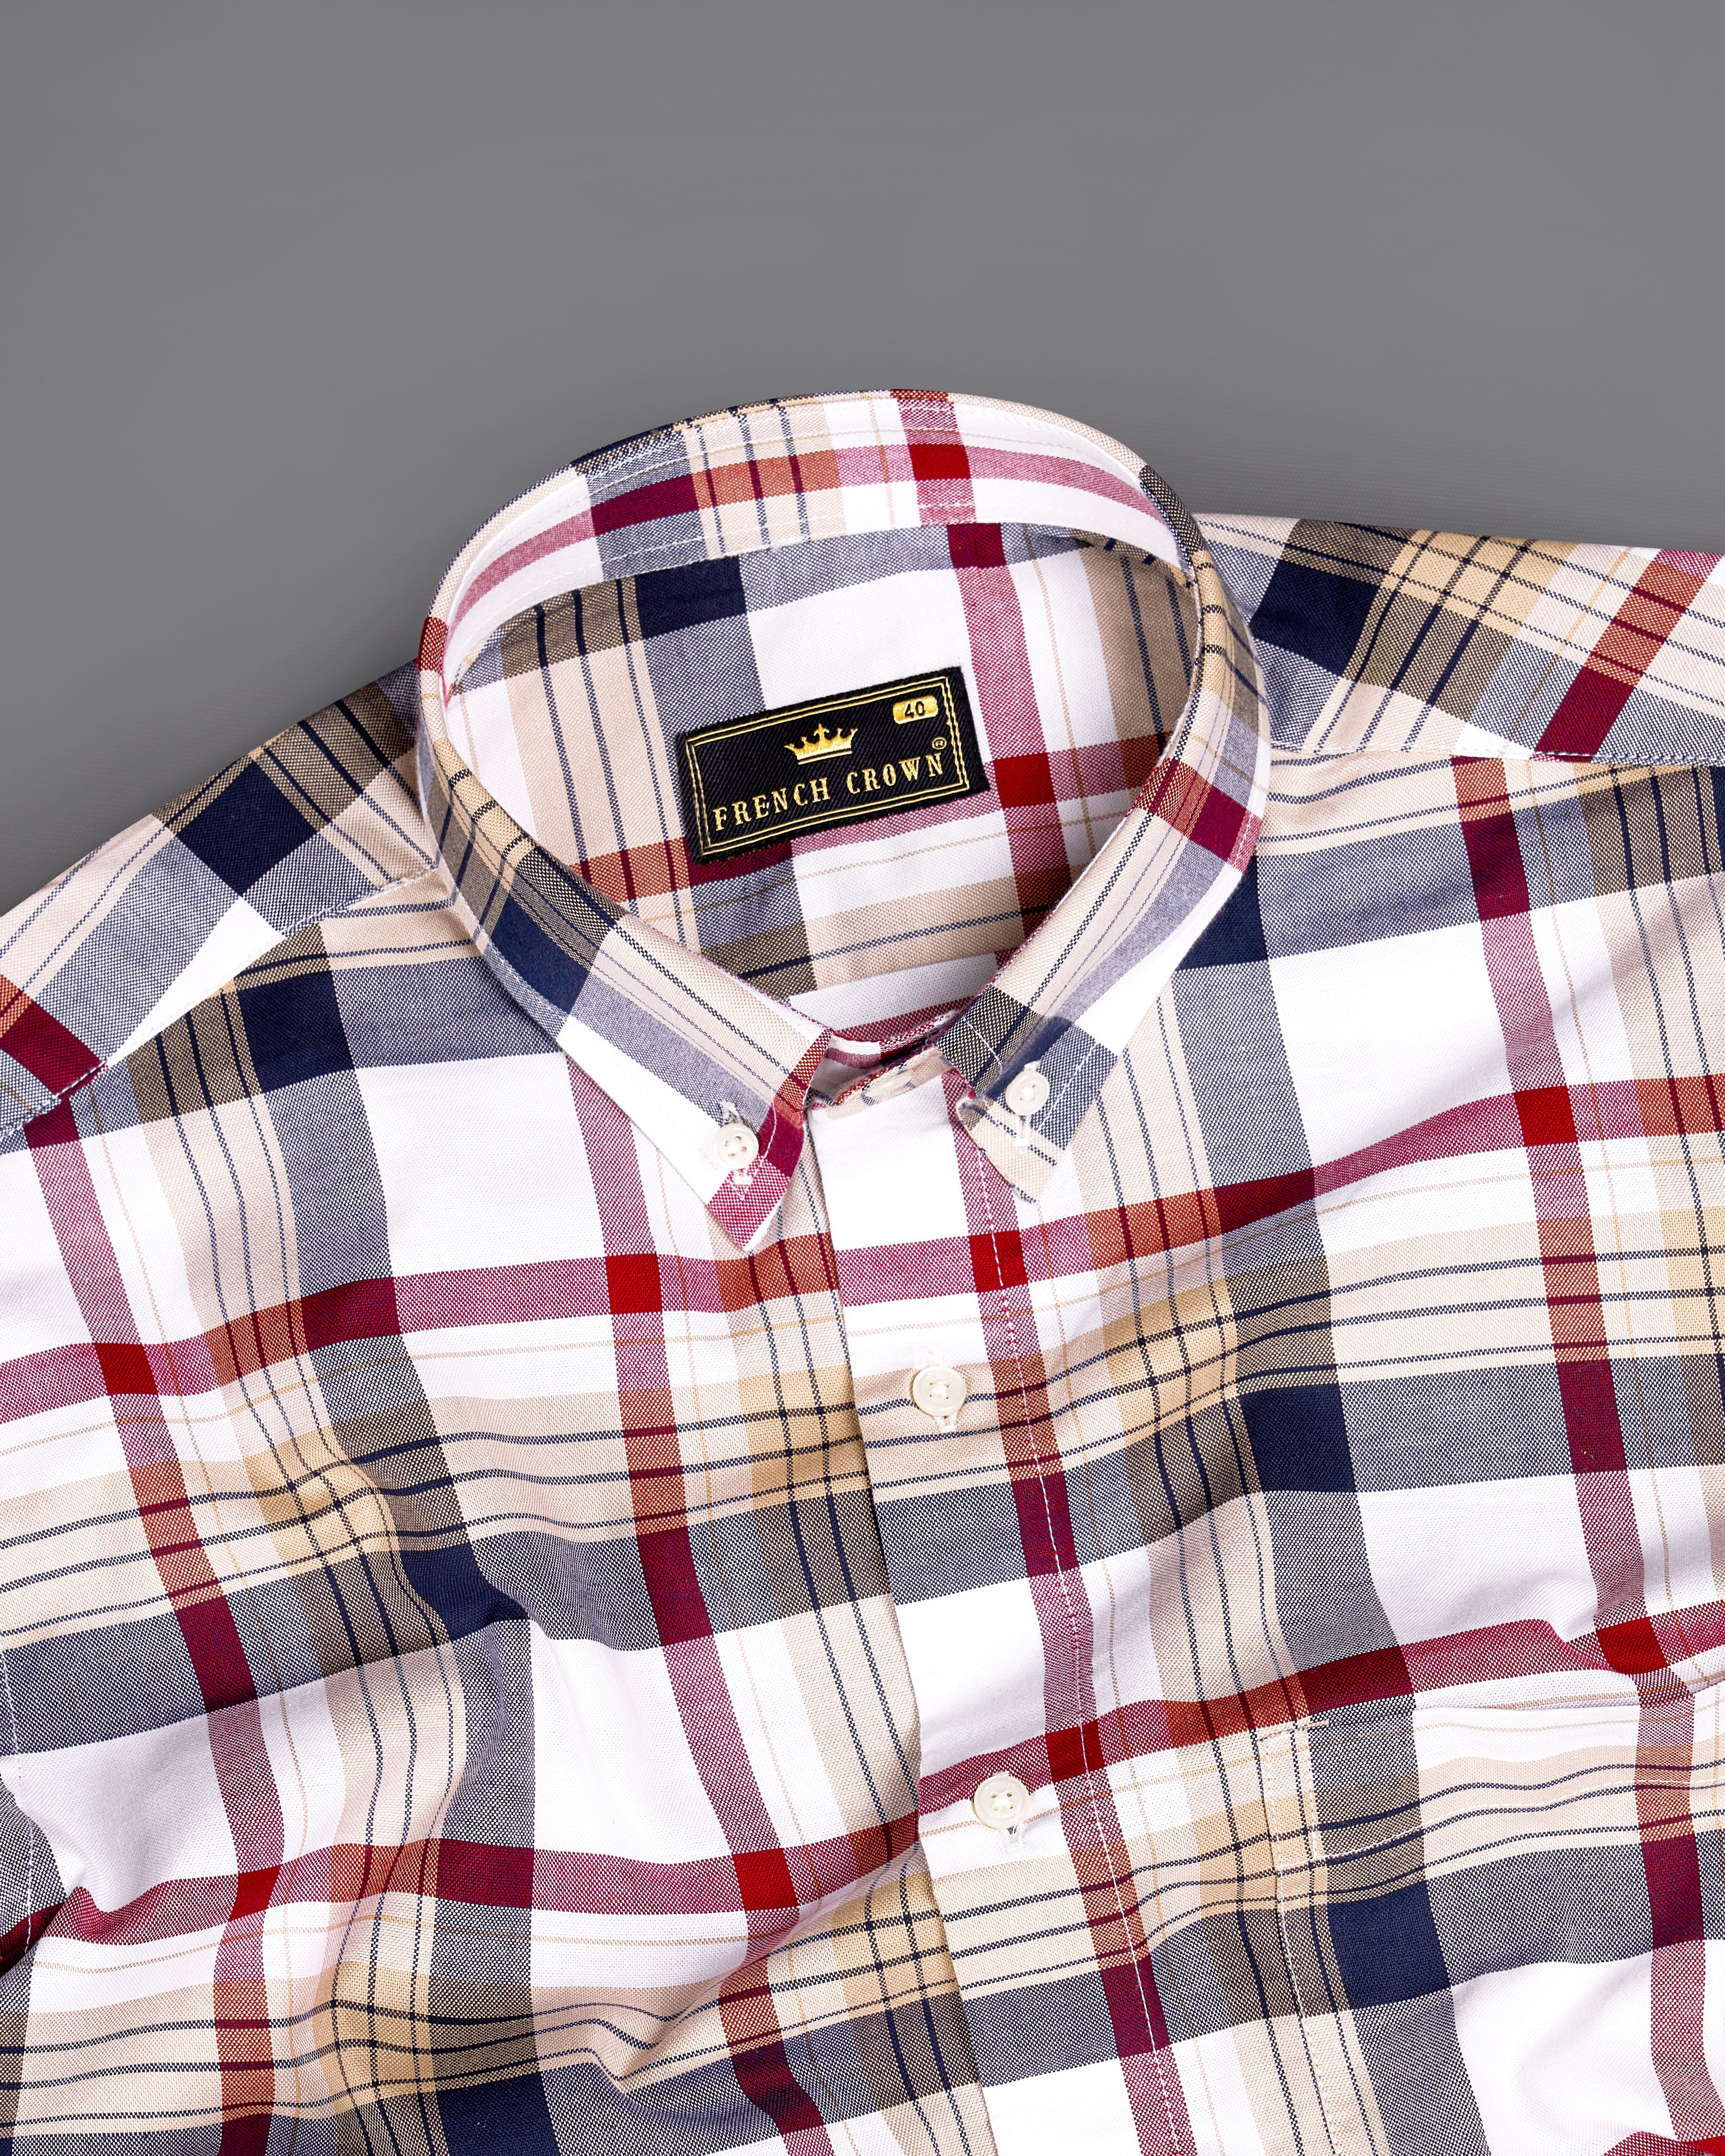 Bright White with Ebony Clay Blue and Pale Taupe Brown Plaid Royal Oxford Shirt 9252-BD-38,9252-BD-H-38,9252-BD-39,9252-BD-H-39,9252-BD-40,9252-BD-H-40,9252-BD-42,9252-BD-H-42,9252-BD-44,9252-BD-H-44,9252-BD-46,9252-BD-H-46,9252-BD-48,9252-BD-H-48,9252-BD-50,9252-BD-H-50,9252-BD-52,9252-BD-H-52